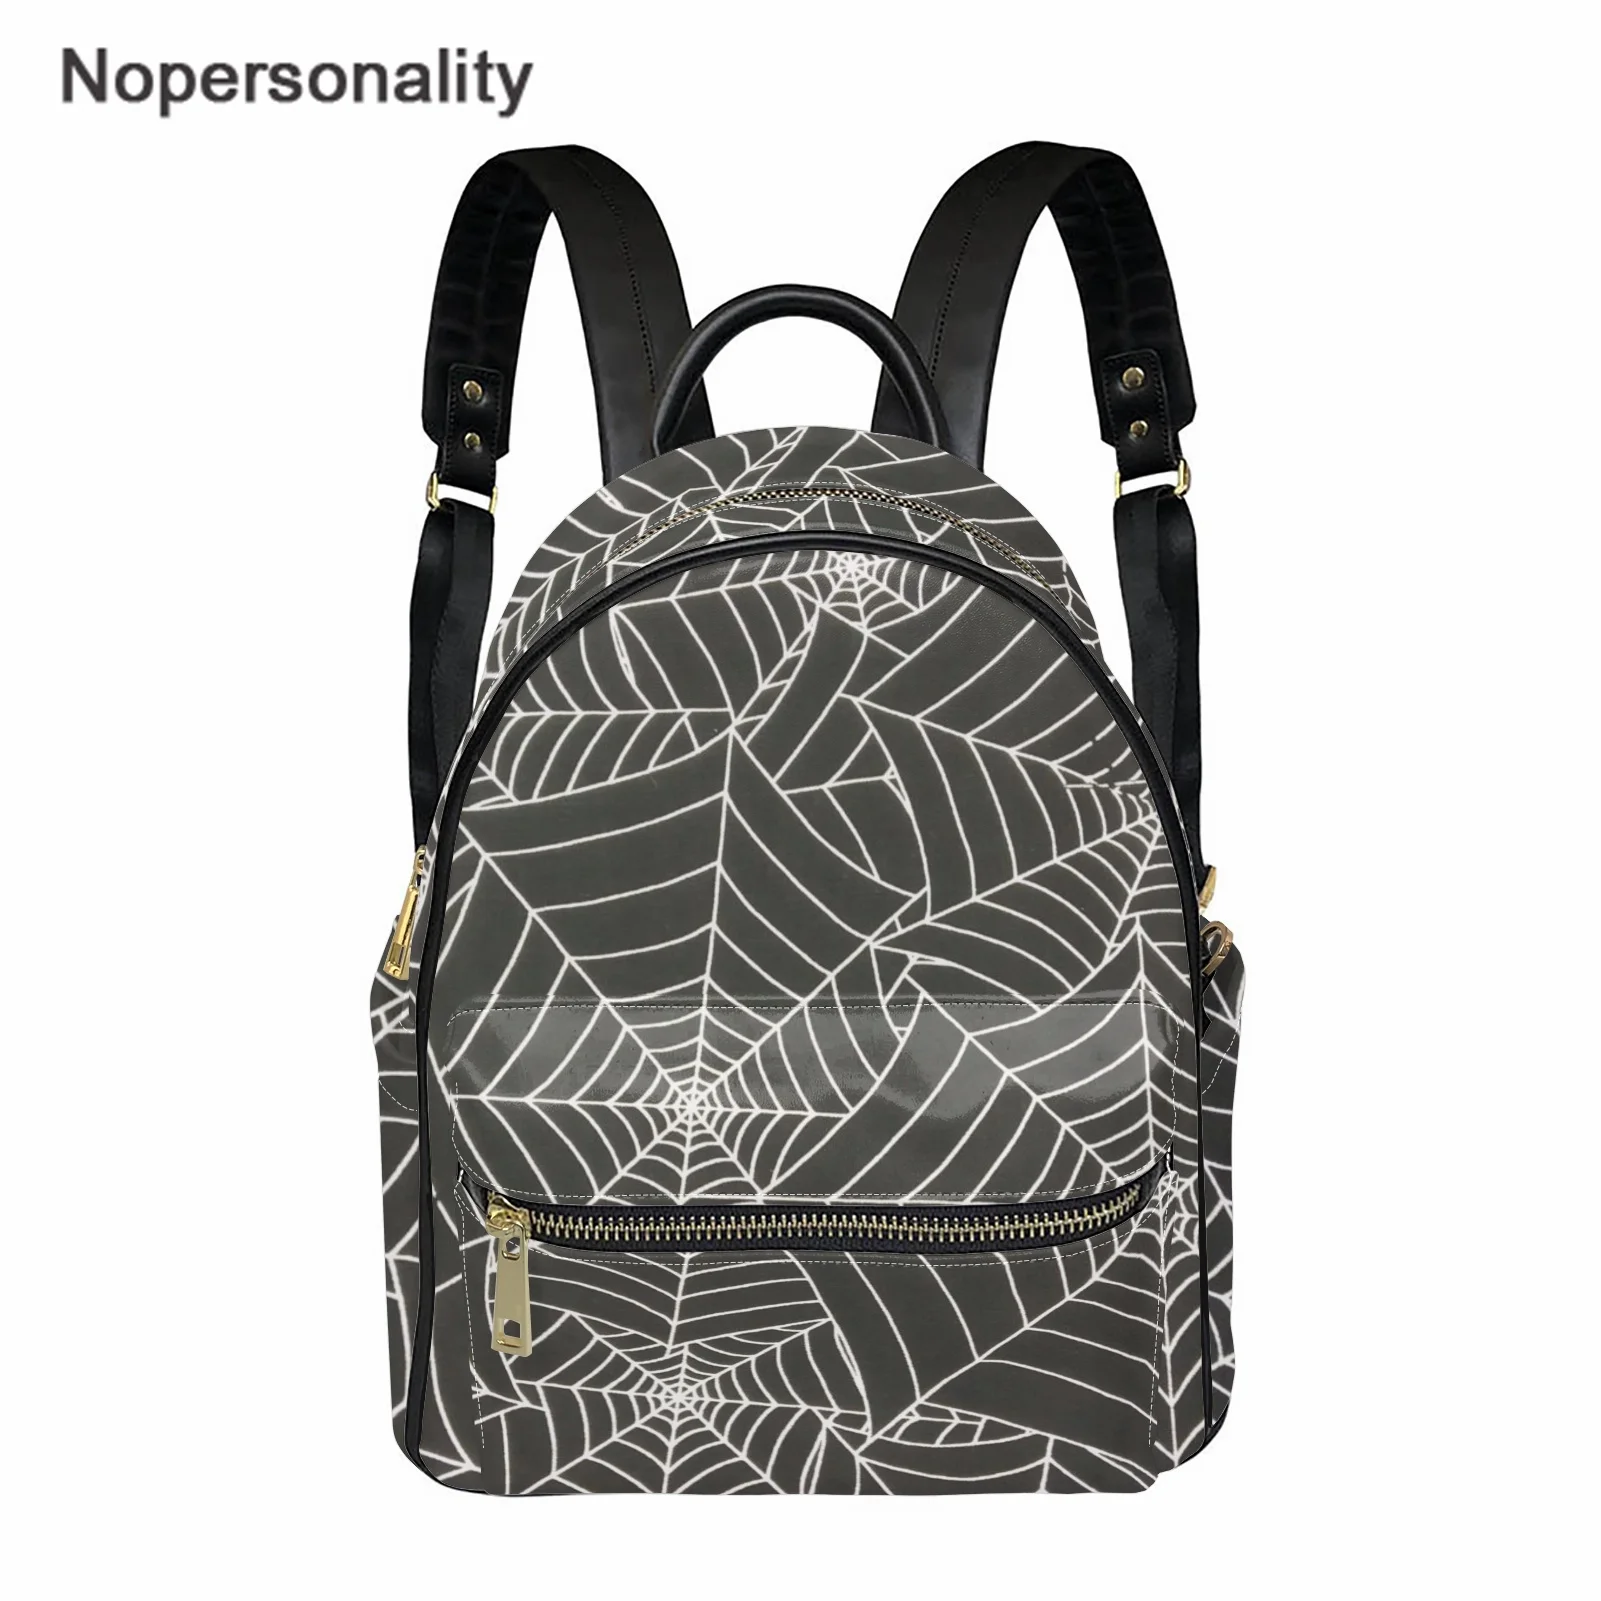 

Nopersonality Fashion Backpack Spider Web Design PU Leather Woman DIY Backbags Casual Big Capacity Bagpack for Teenager Girls